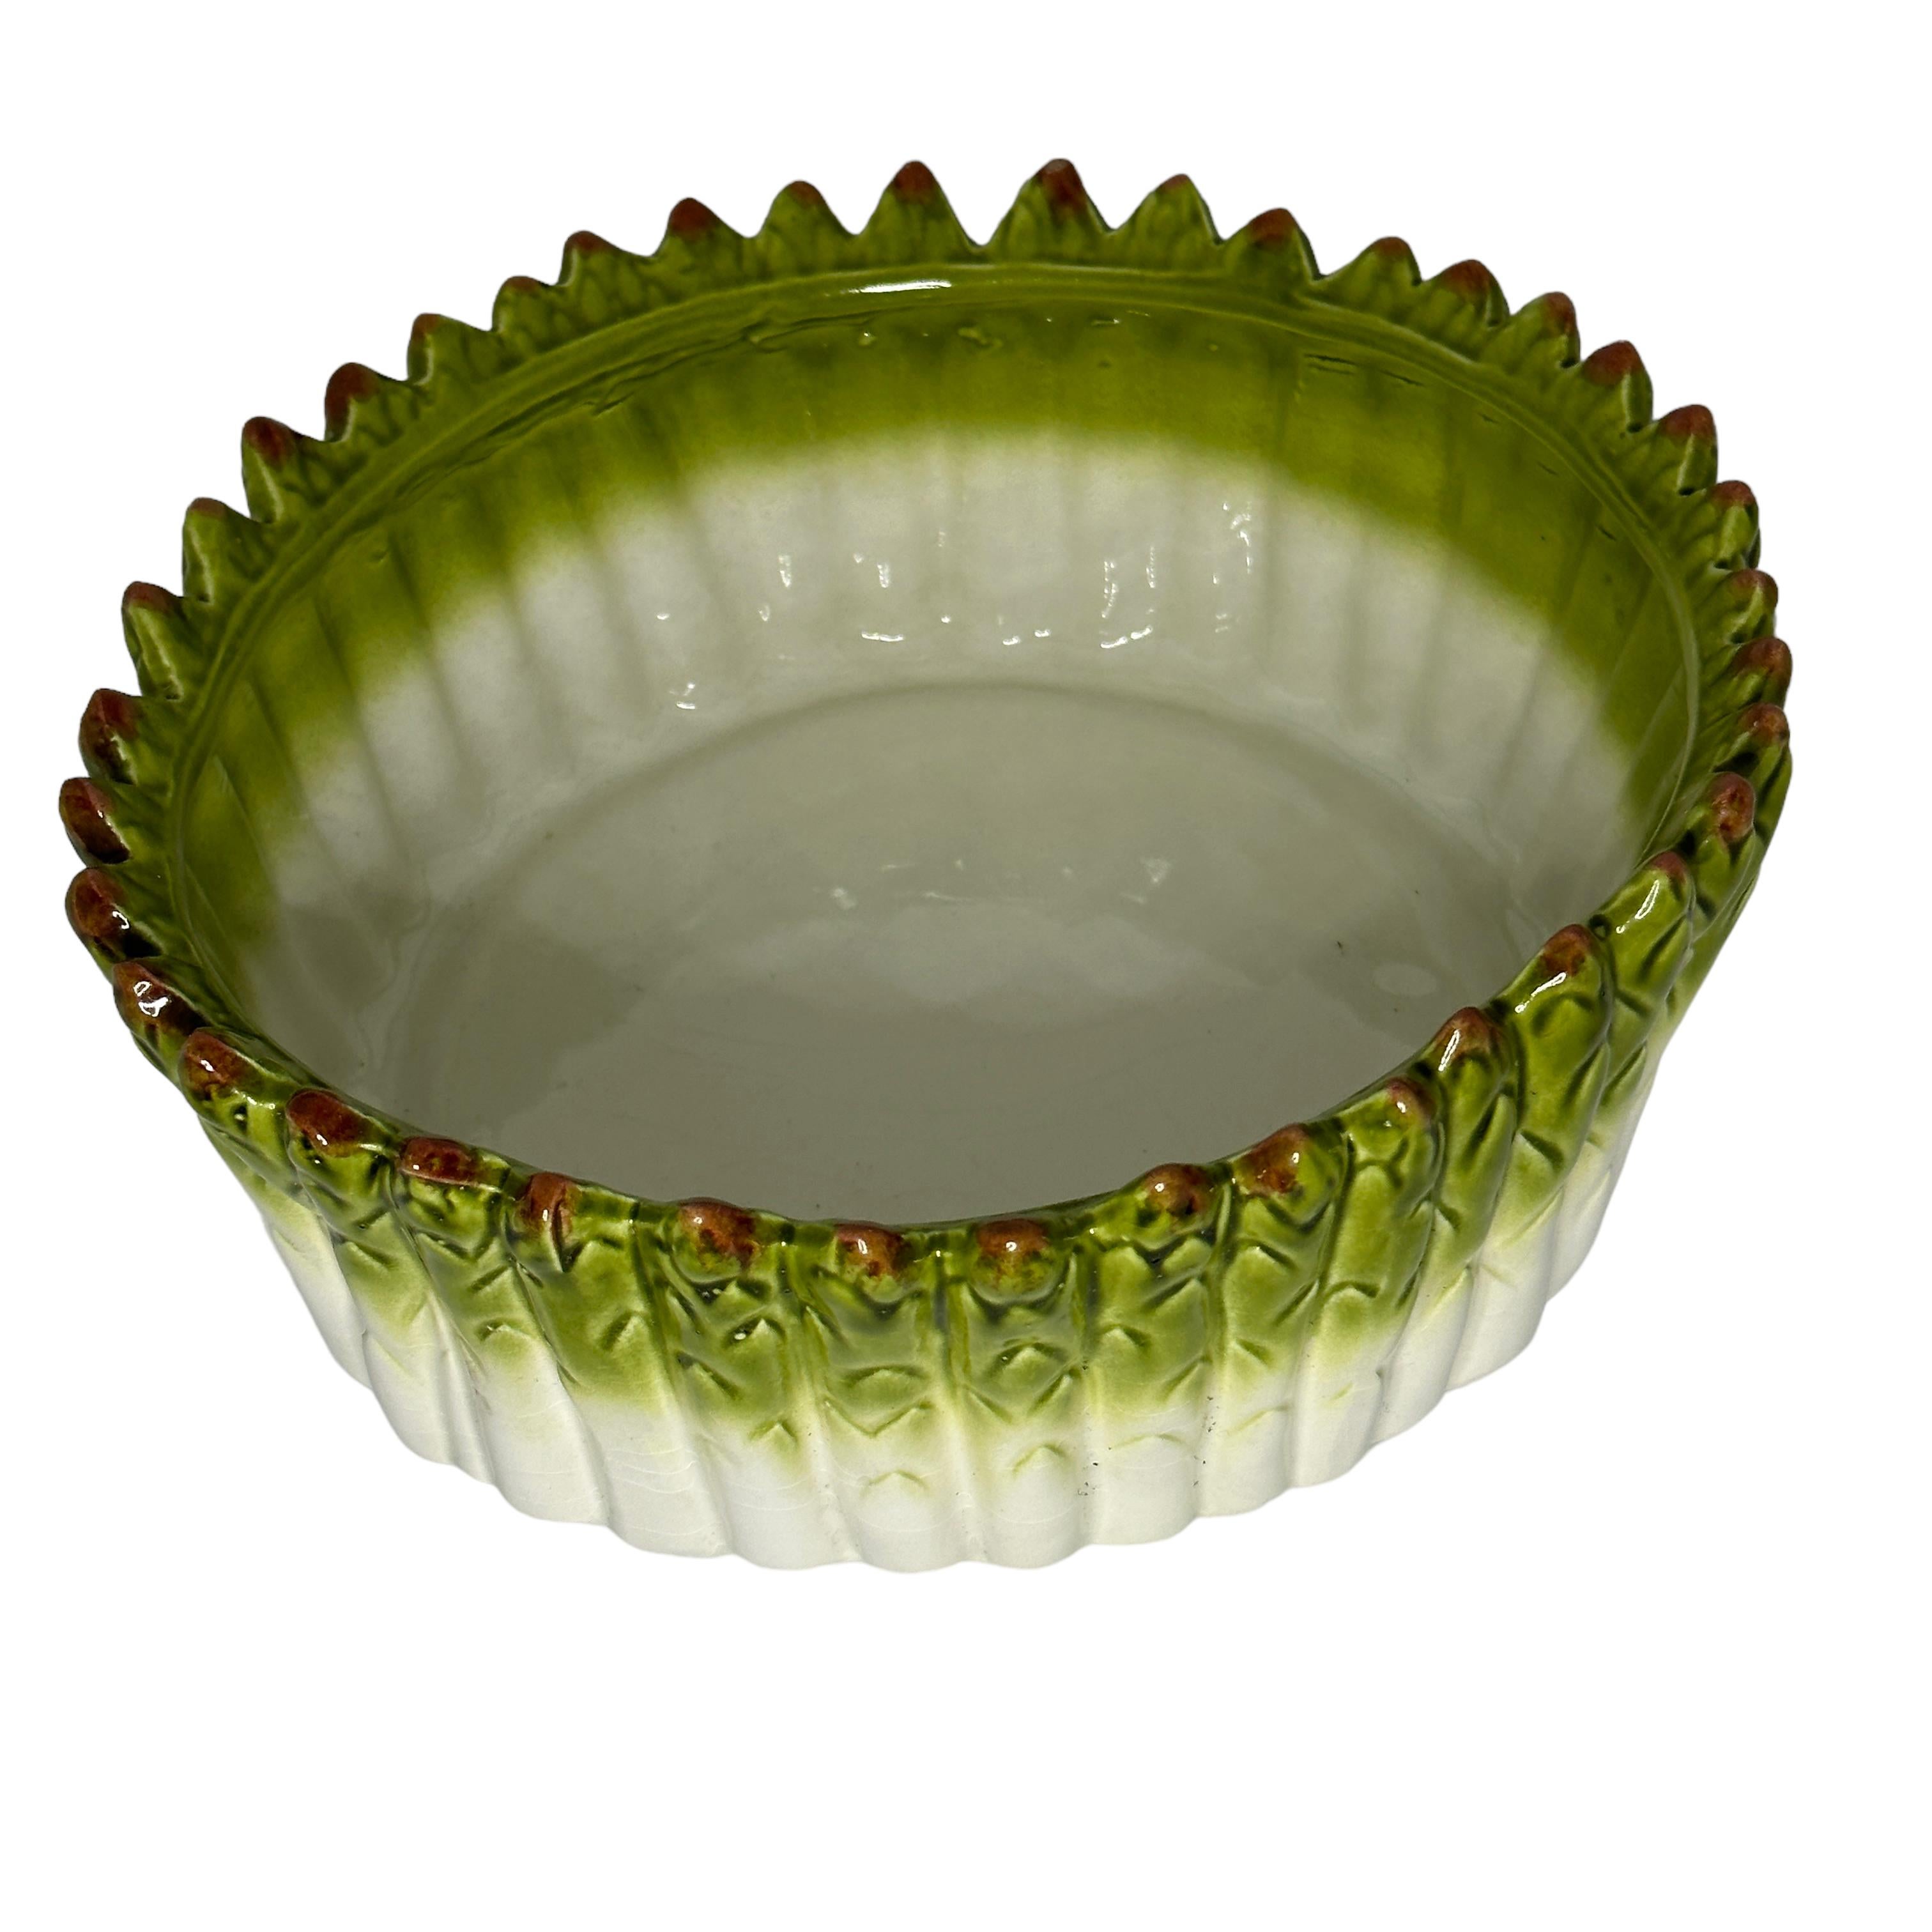 Italian Vintage Ceramic Faience Majolica Asparagus Serving Bowl, Italy 1980s For Sale